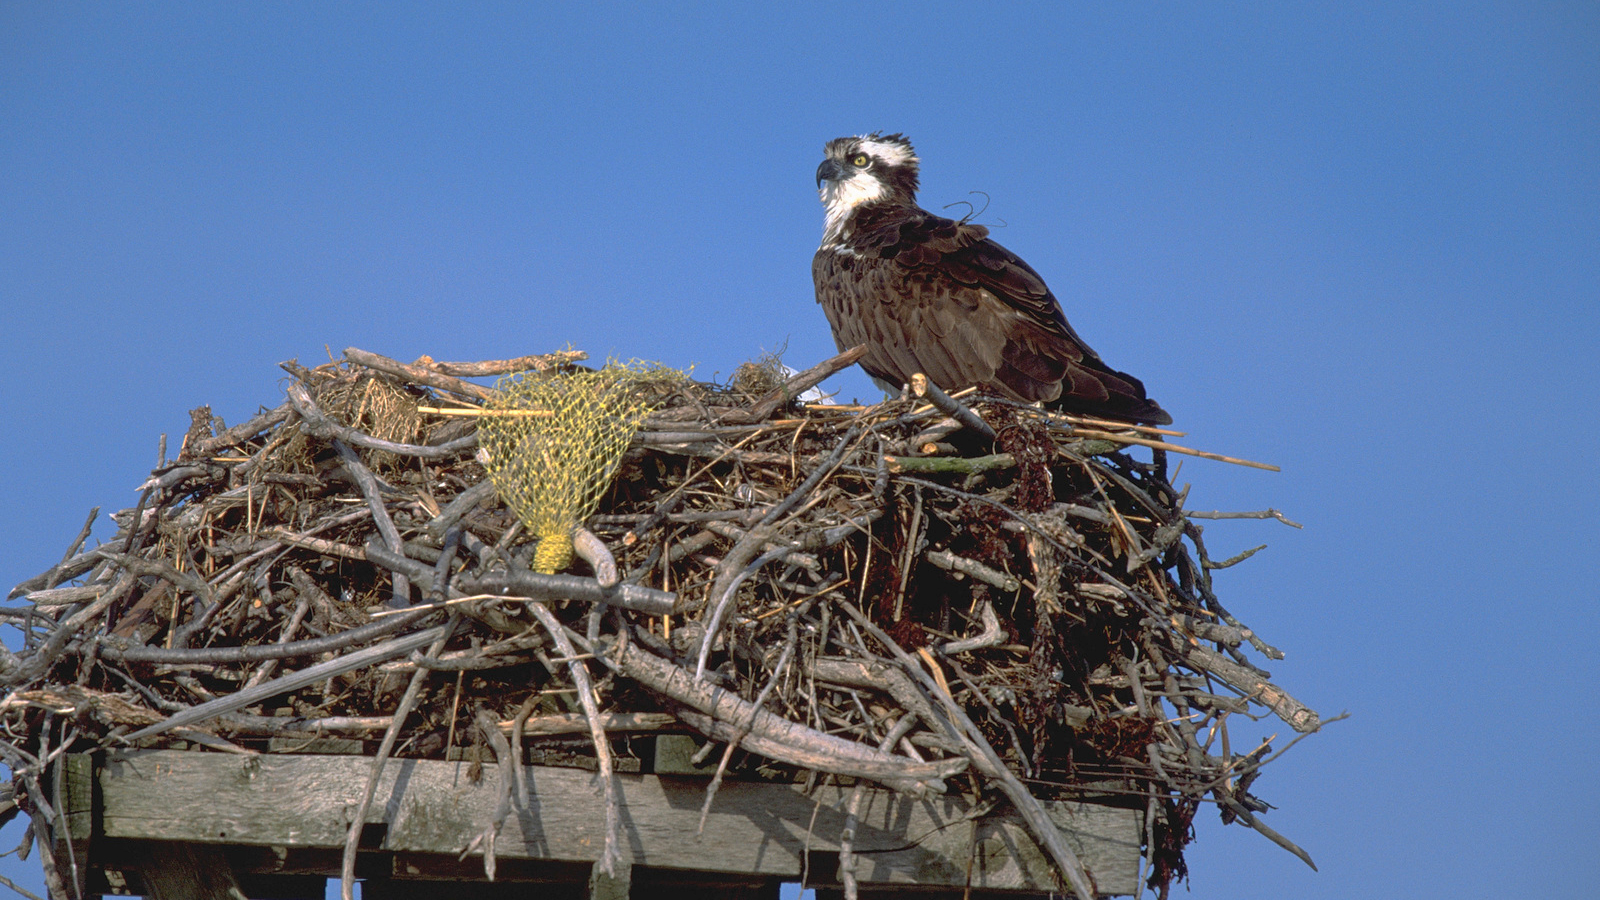 A nest that includes discarded fishing gear on Shelter Island in New York. Photo © Doug Wechsler